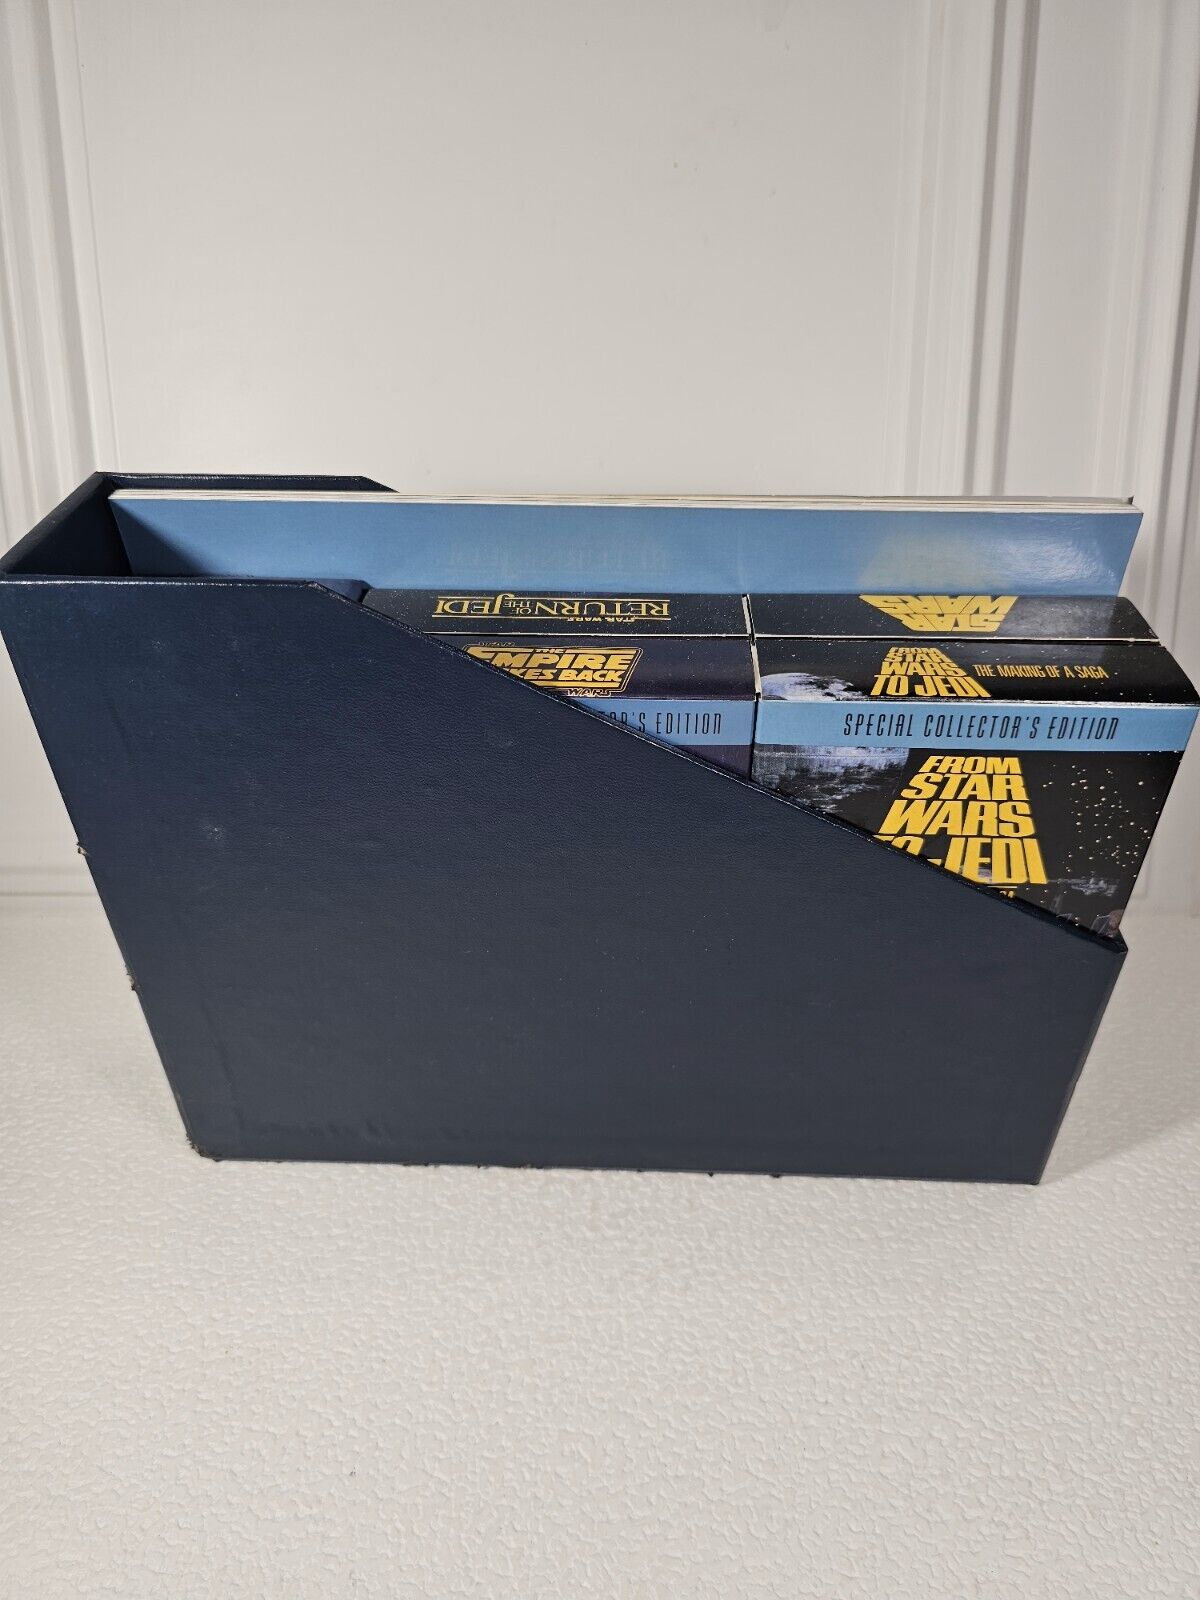 VTG 1992 The Star Wars Trilogy Letterbox Collector's Edition,VHS Set, No Lid